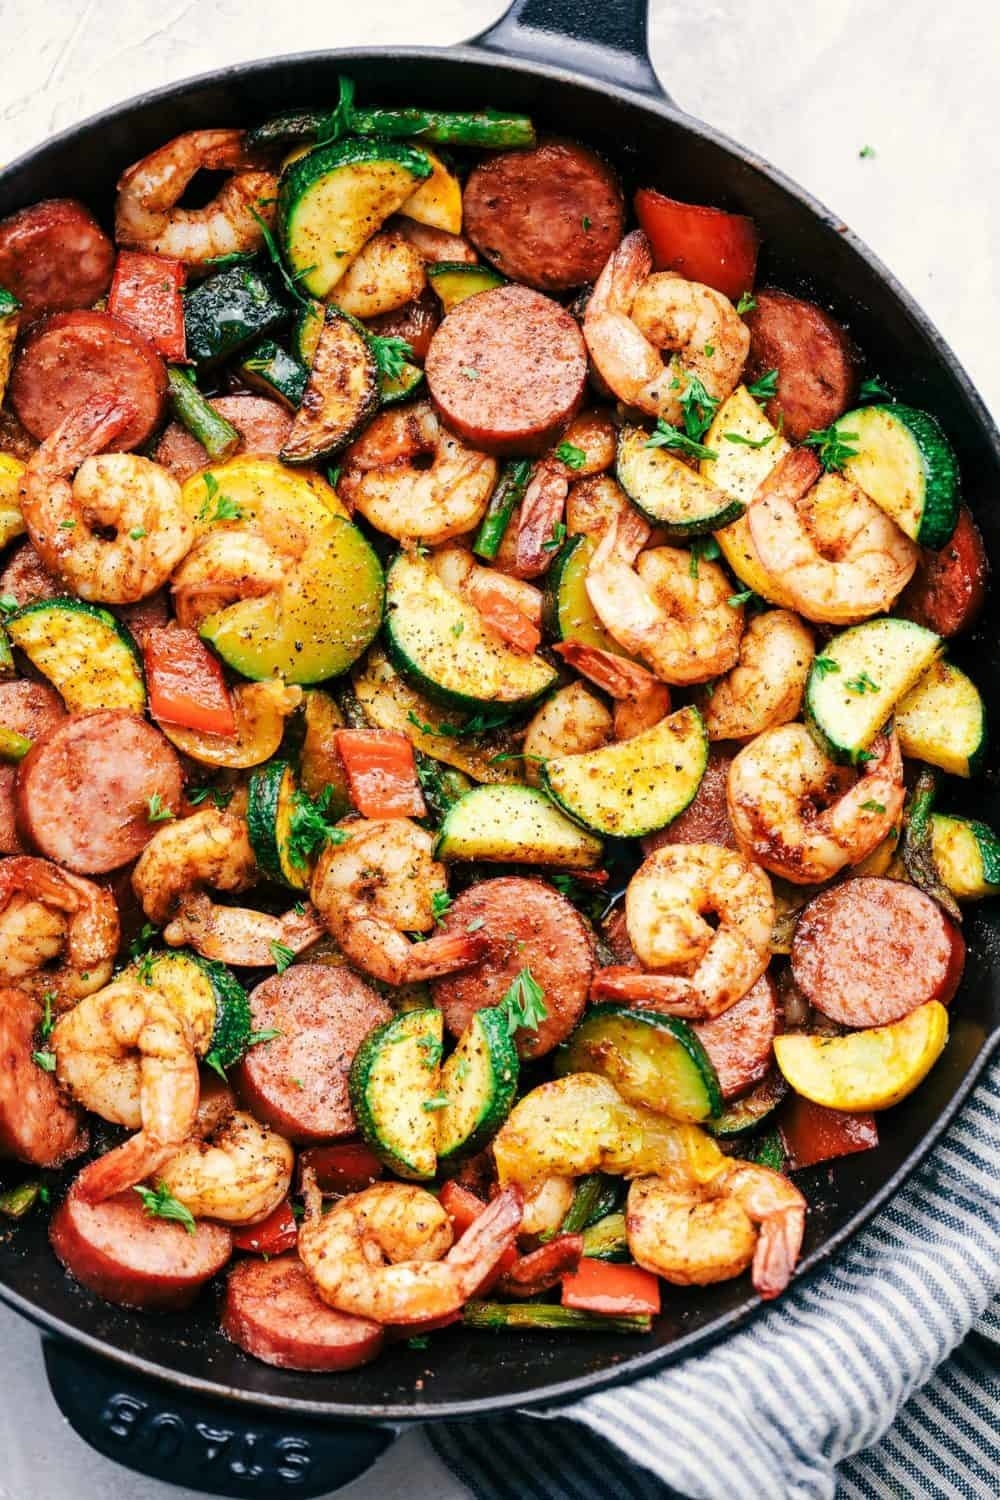 A skillet filled with a cooked mix of shrimp, sausage slices, zucchini, and bell peppers. The dish appears seasoned and garnished with herbs